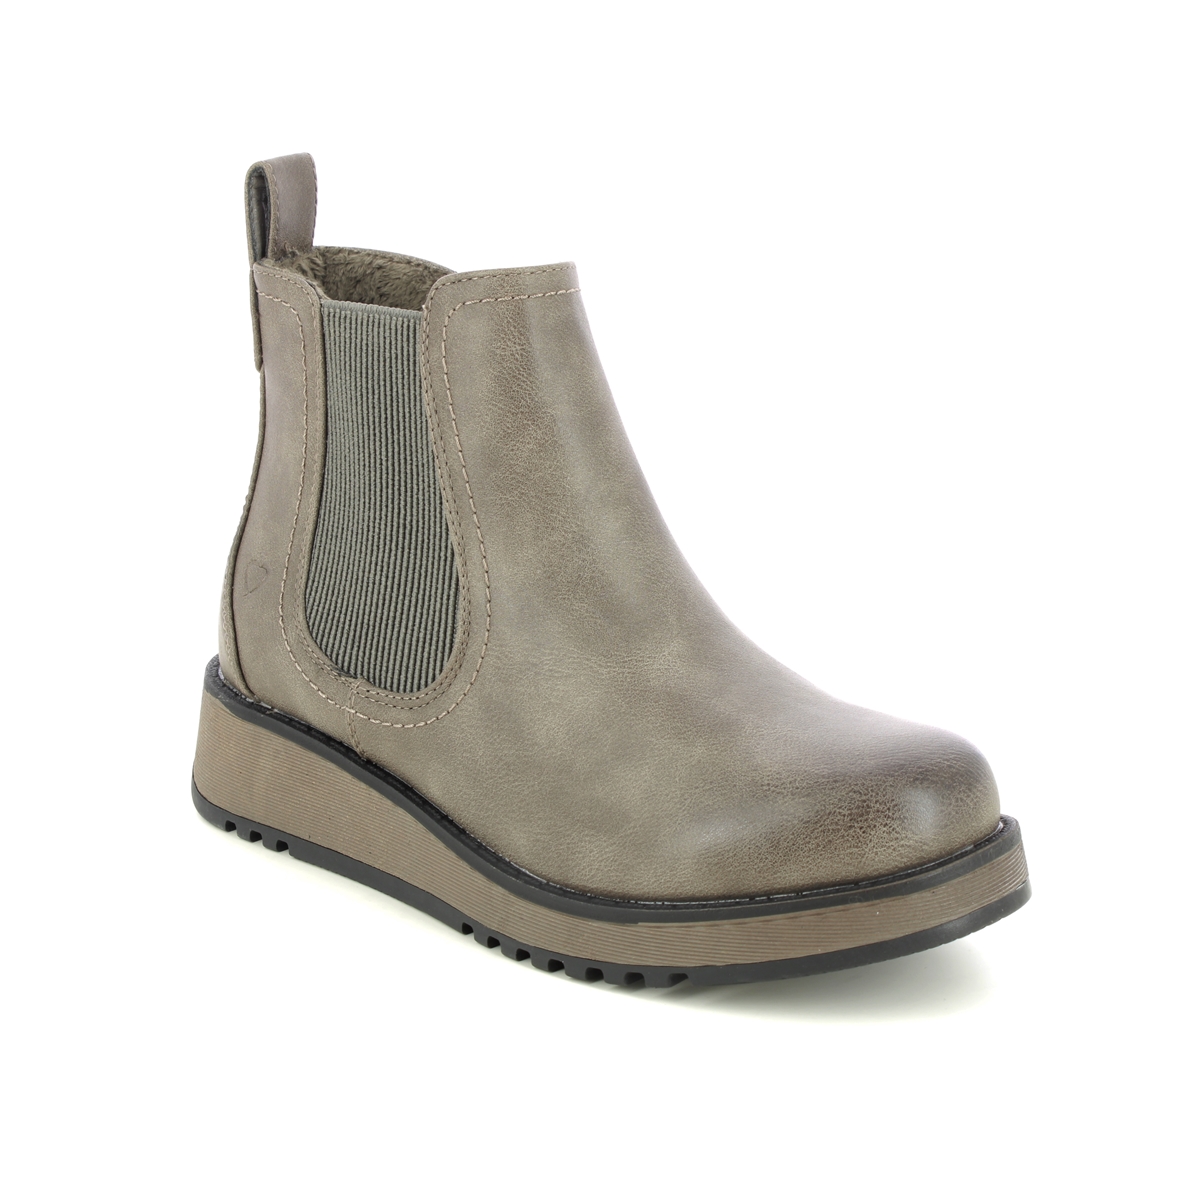 Heavenly Feet Rolo   2 New Dark Taupe Womens Chelsea Boots 3503-50 In Size 5 In Plain Dark Taupe